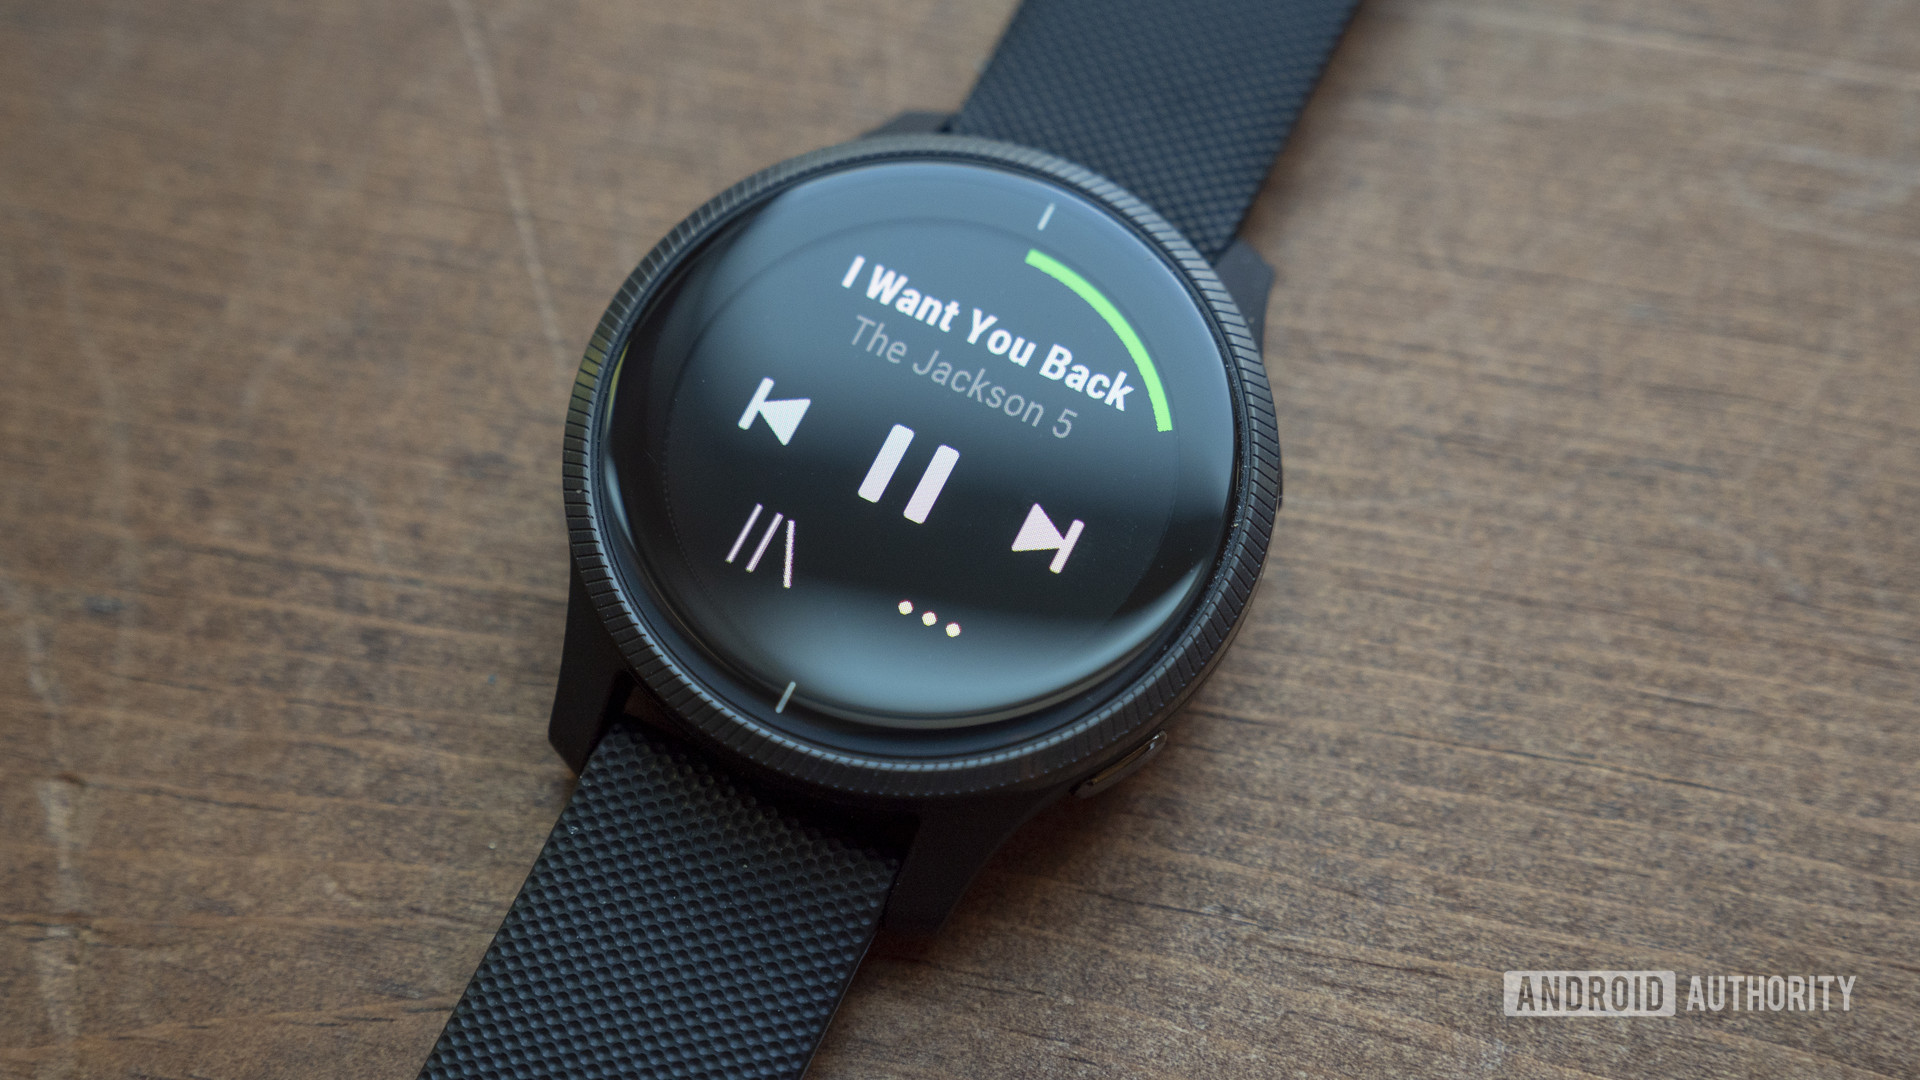 Garmin music services: Spotify, Amazon Music, more - Android Authority